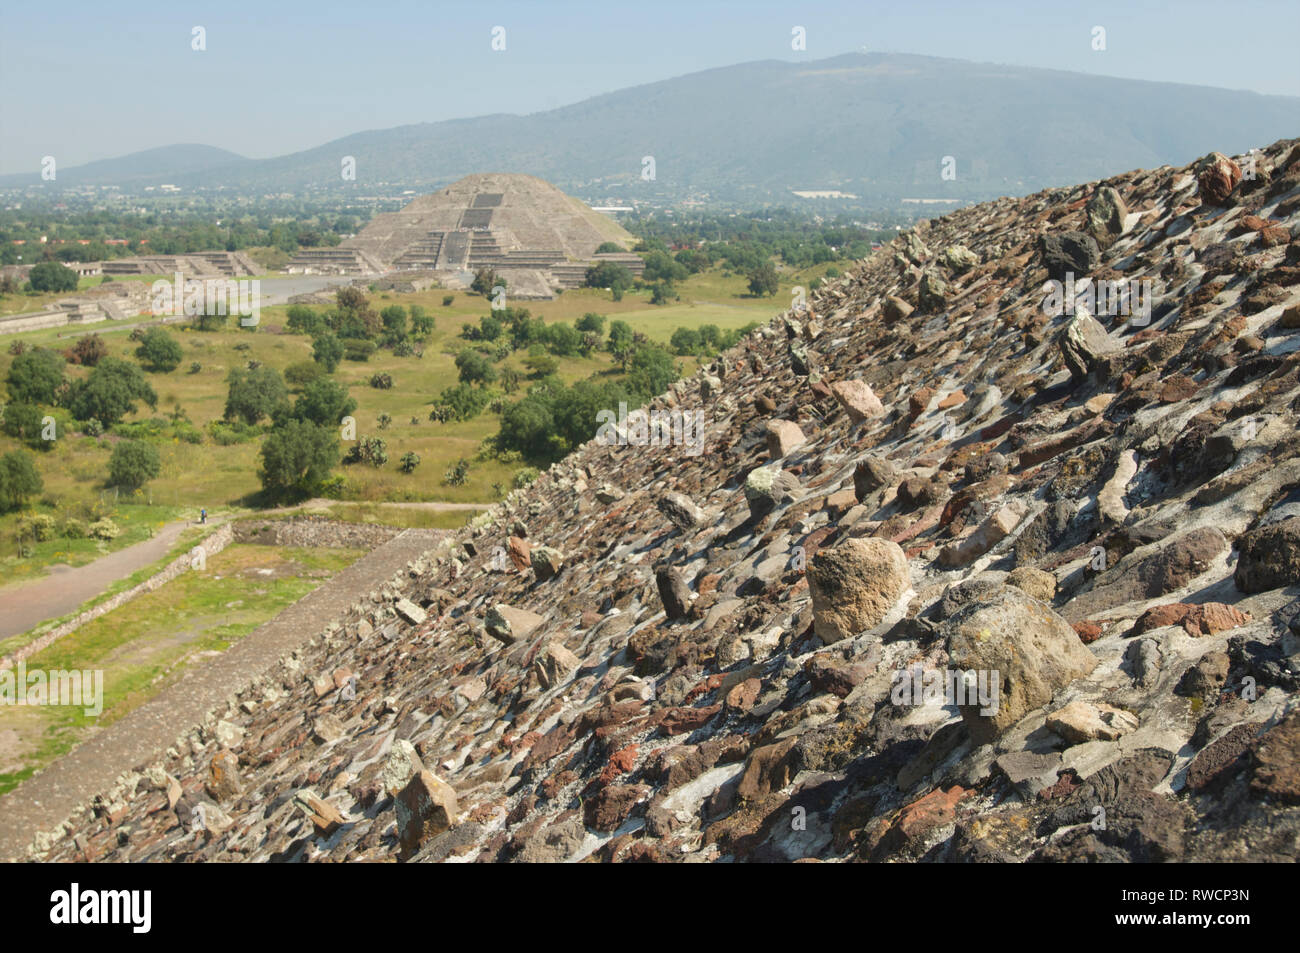 Pyramid of The Moon in the distance seen from Pyramid of The Sun at Teotihuacan in the Vaslley of Mexico in Mexico Stock Photo